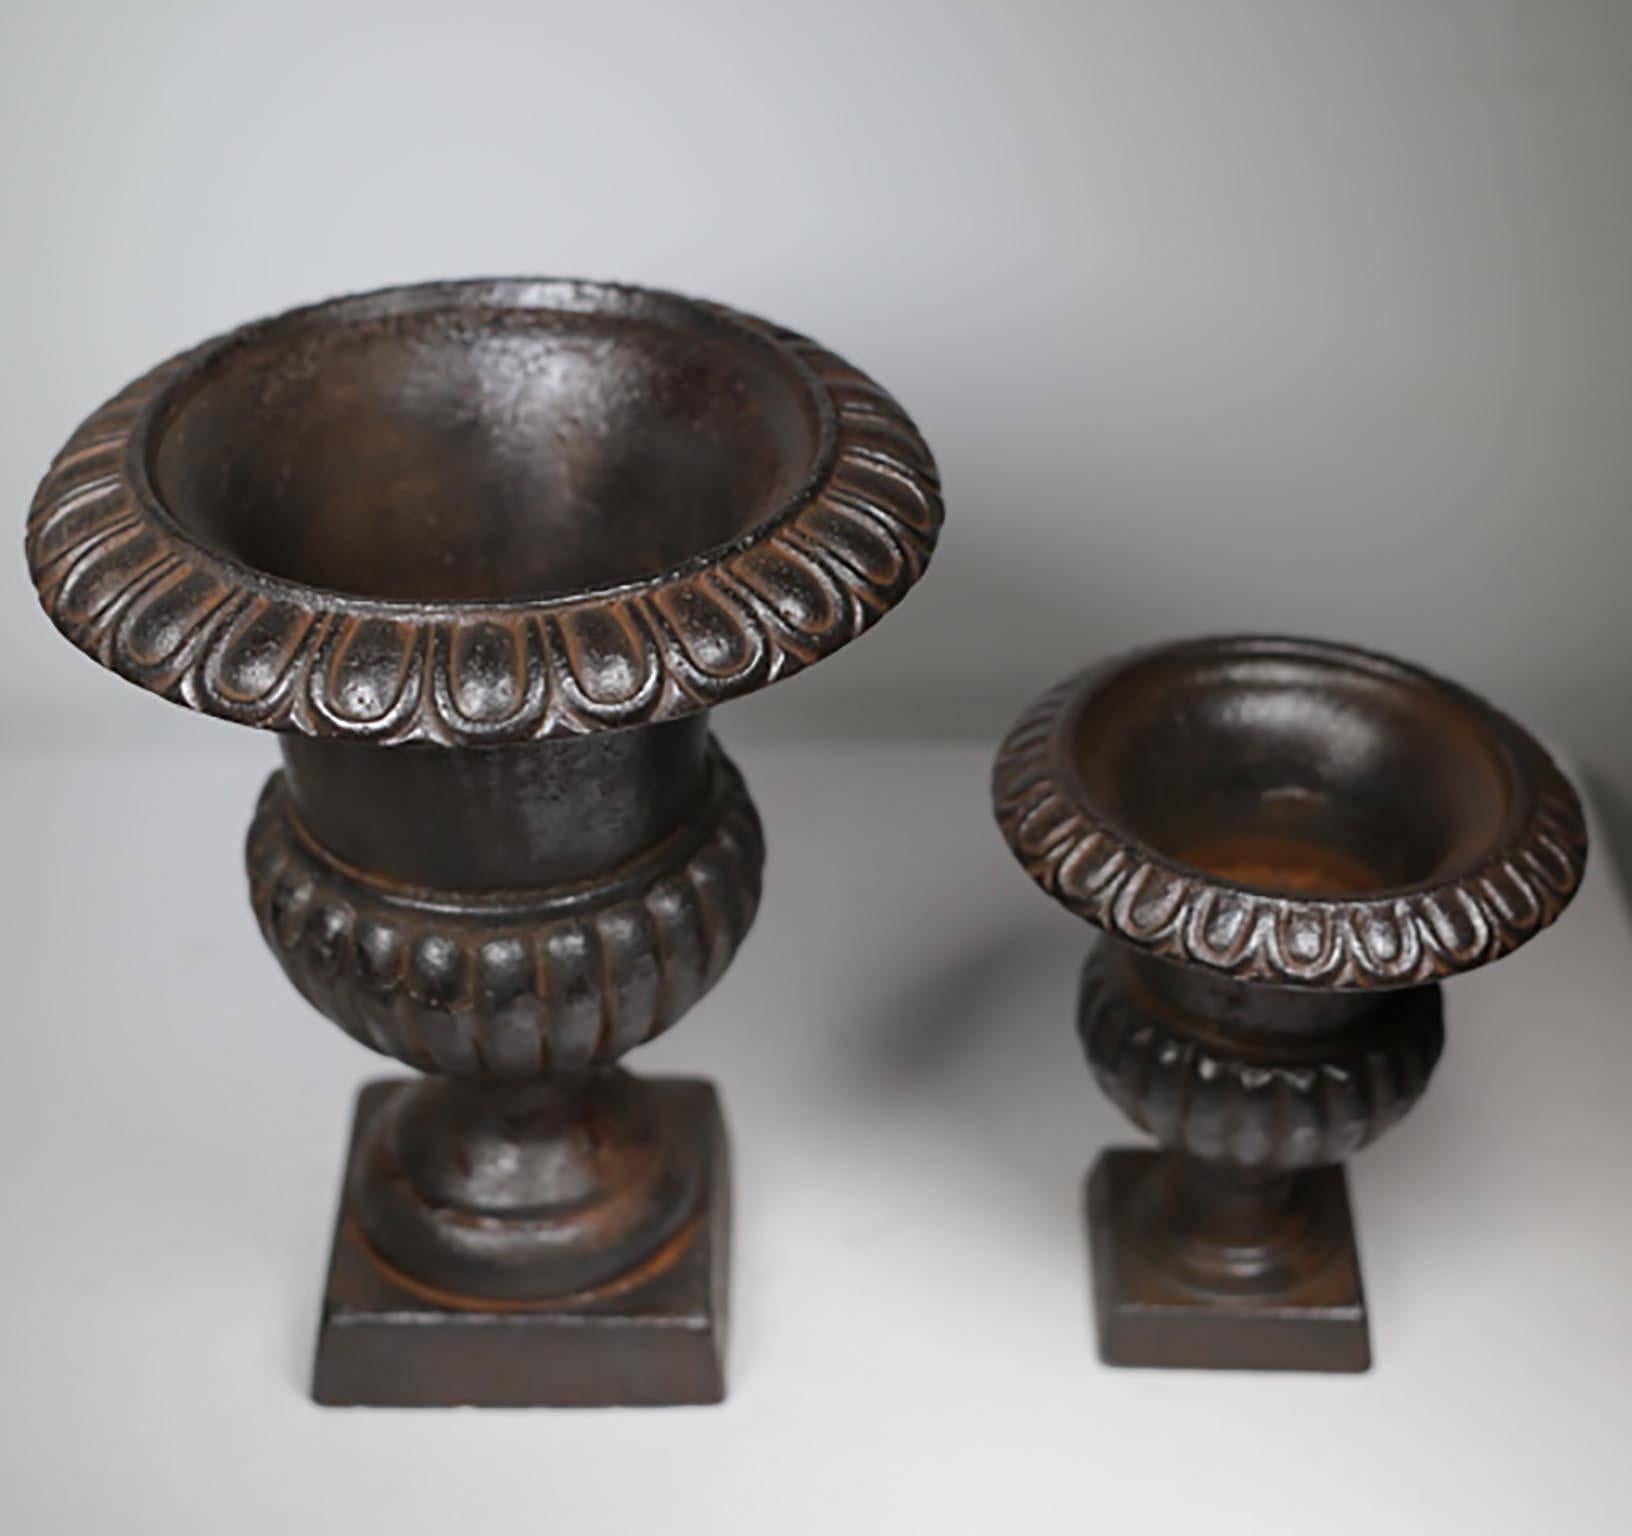 On cast iron urn, circa 1930s. The small one has sold. The large urn is still avaiable. 